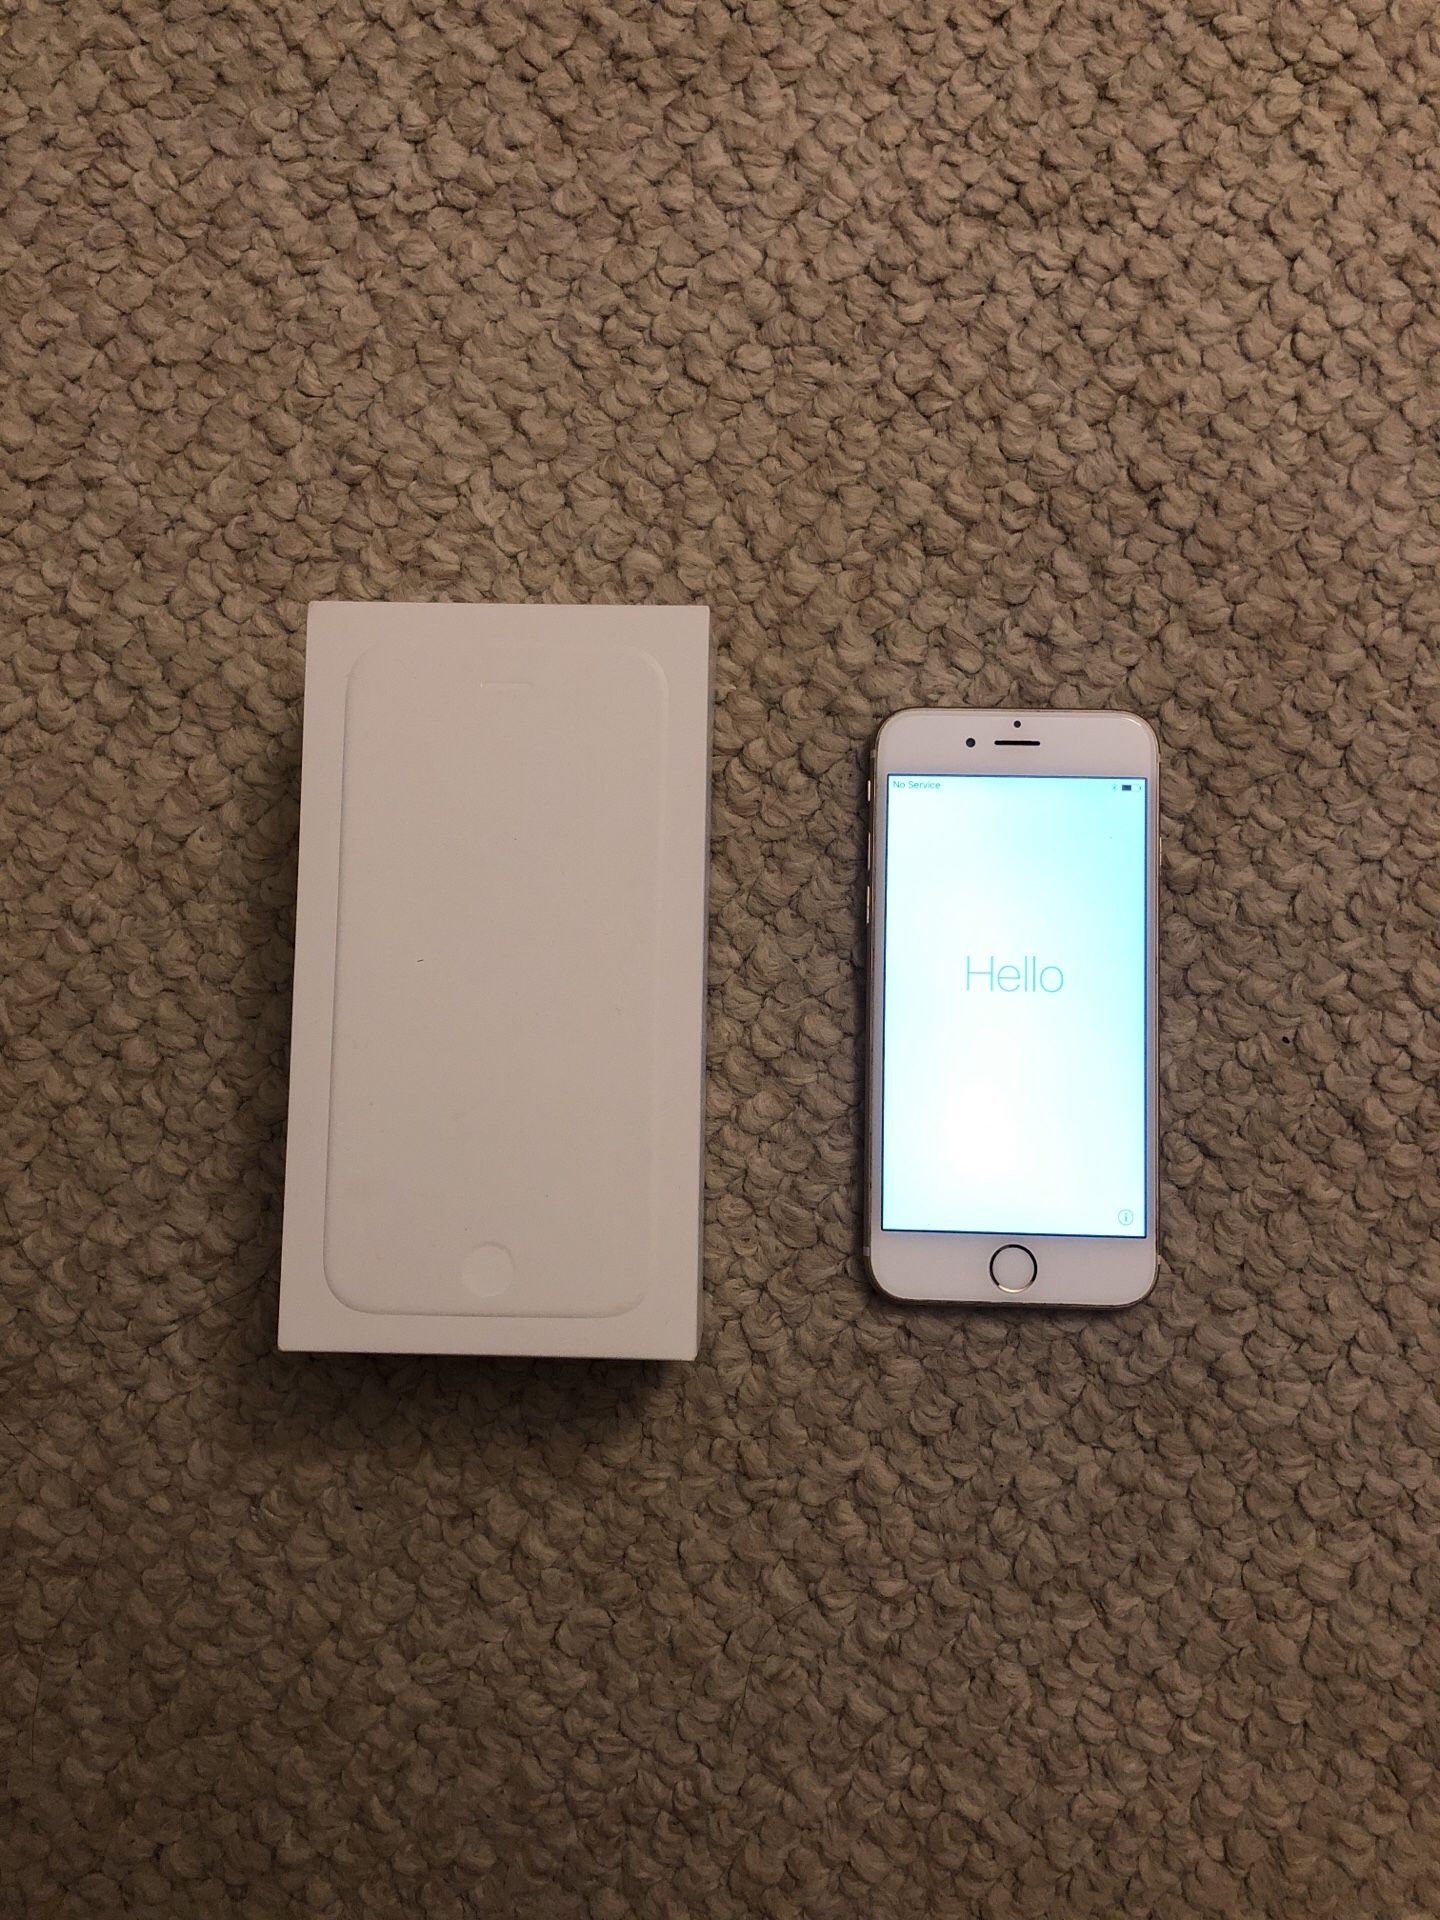 Apple iPhone 6 gold 16gb used AT&T